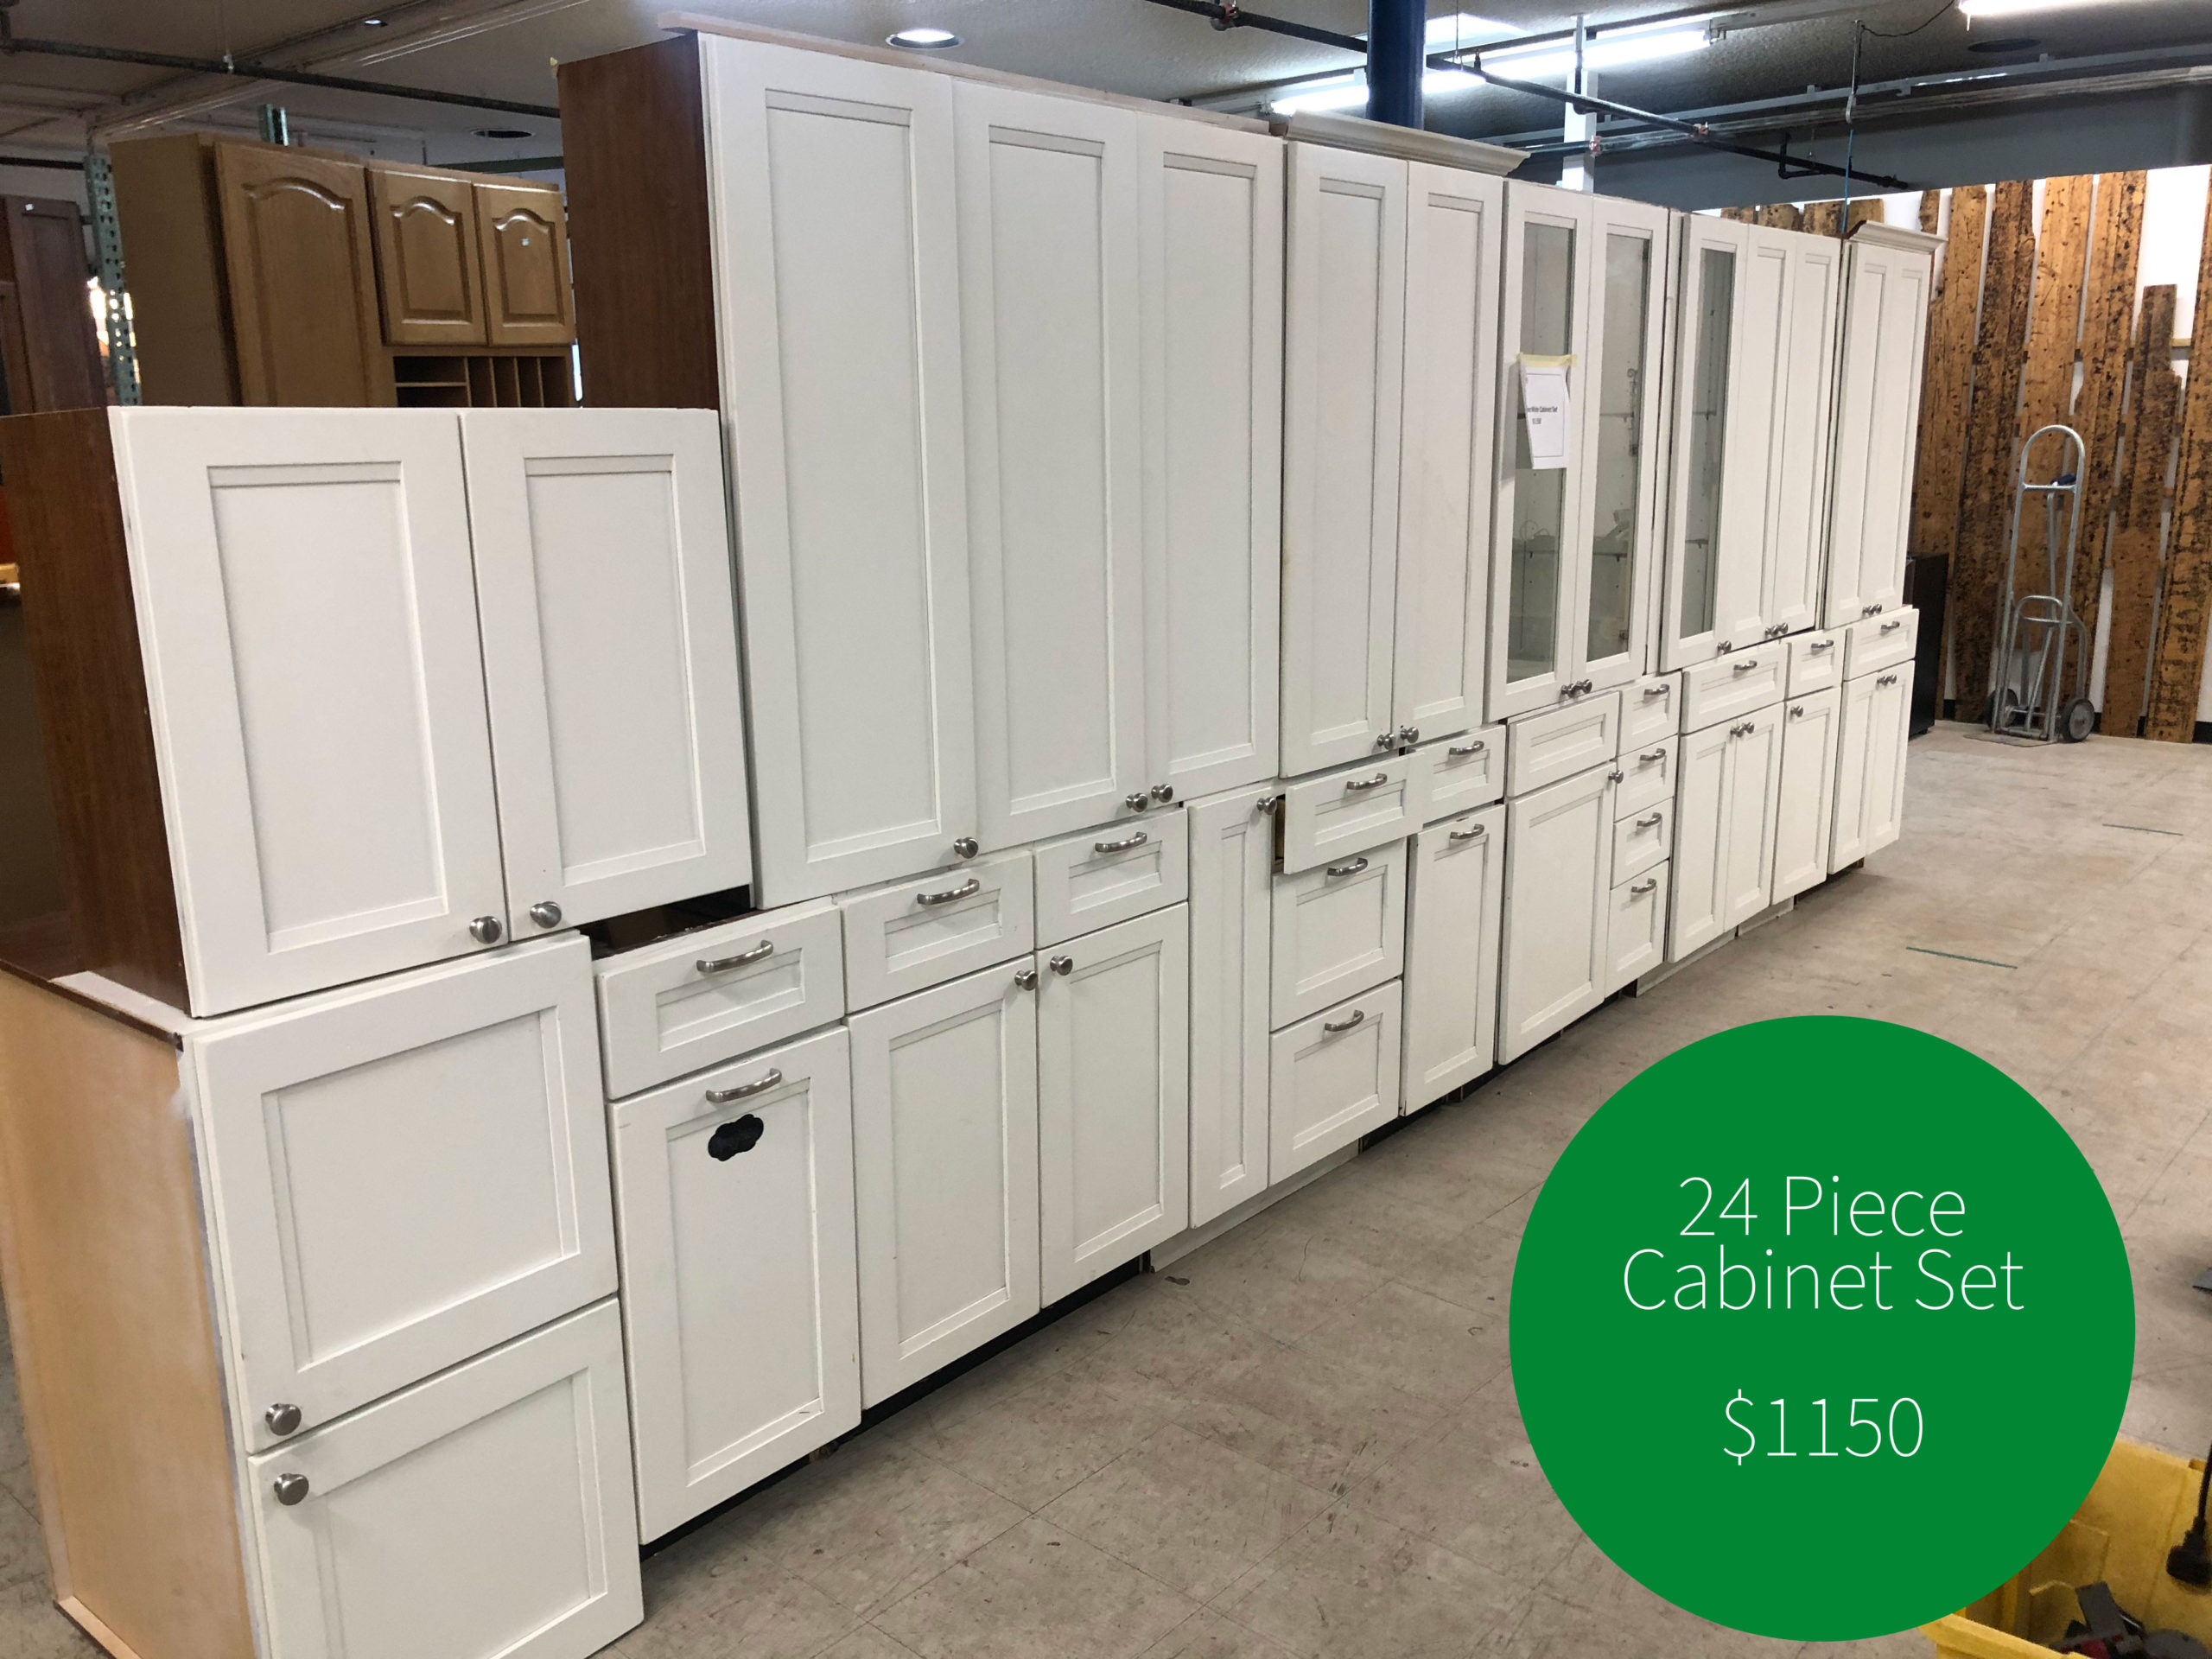 https://resourcecentral.org/wp-content/uploads/2021/06/White-24-Piece-Cabinet-Set-scaled.jpg